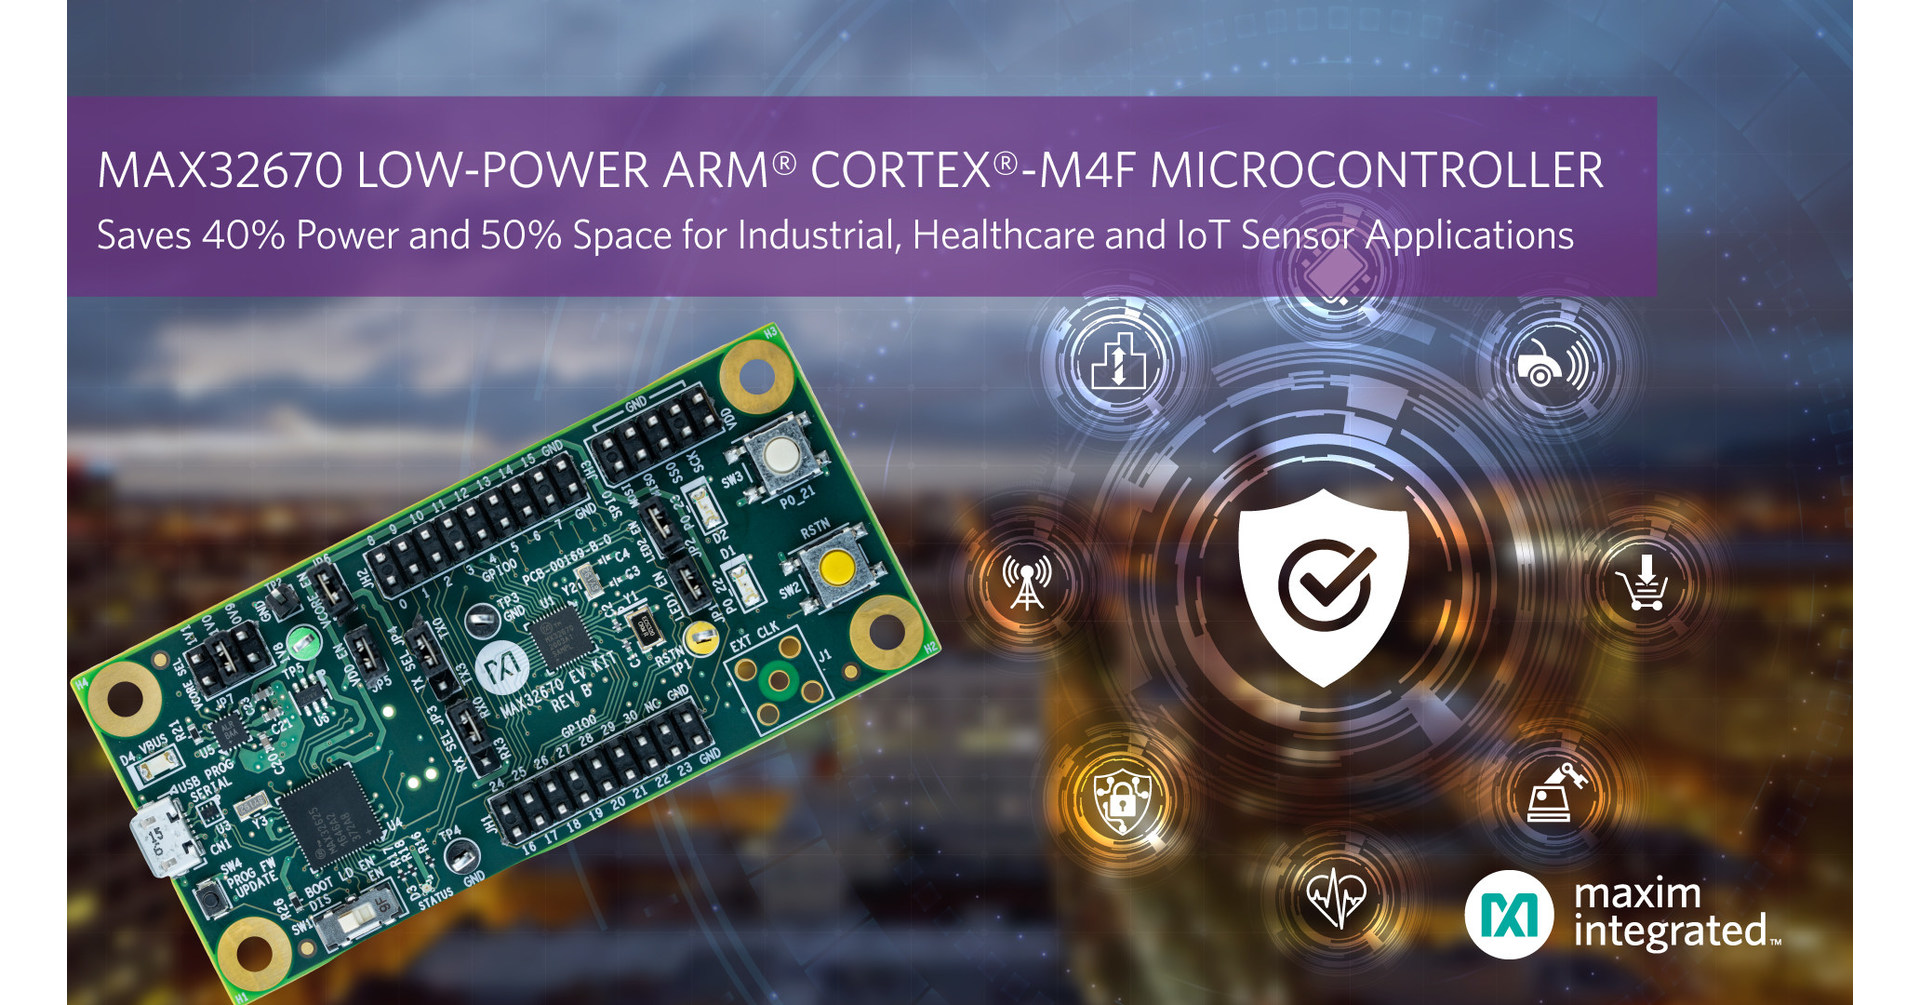 Ultra Reliable Arm Cortex M4f Microcontroller From Maxim Integrated Offers Industry S Lowest Power Consumption And Smallest Size For Industrial Healthcare And Iot Sensor Applications